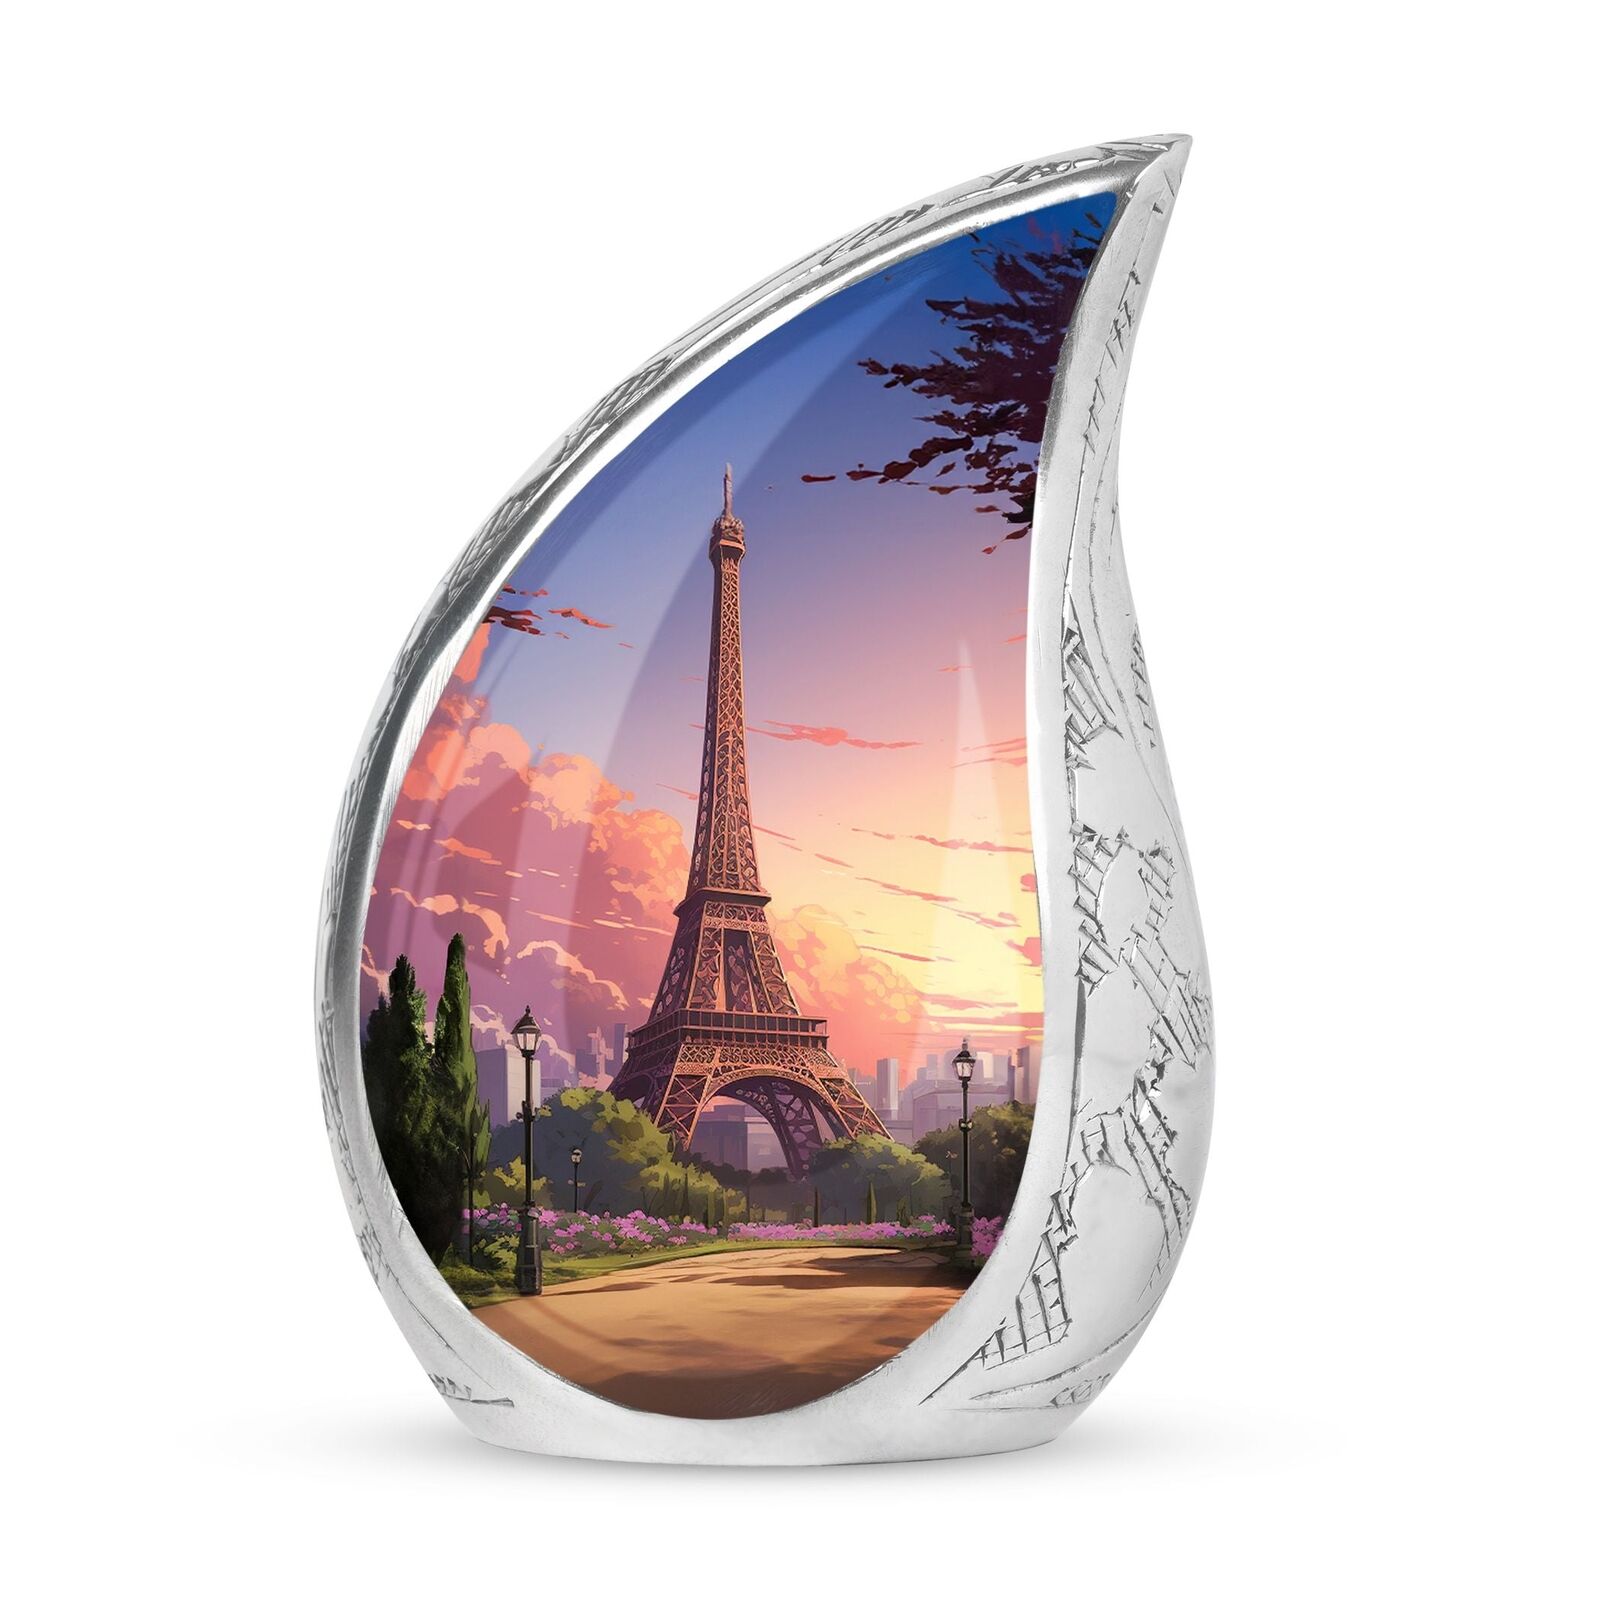 Stunning Eiffel Tower Park View- Commemorative Urns For Ashes